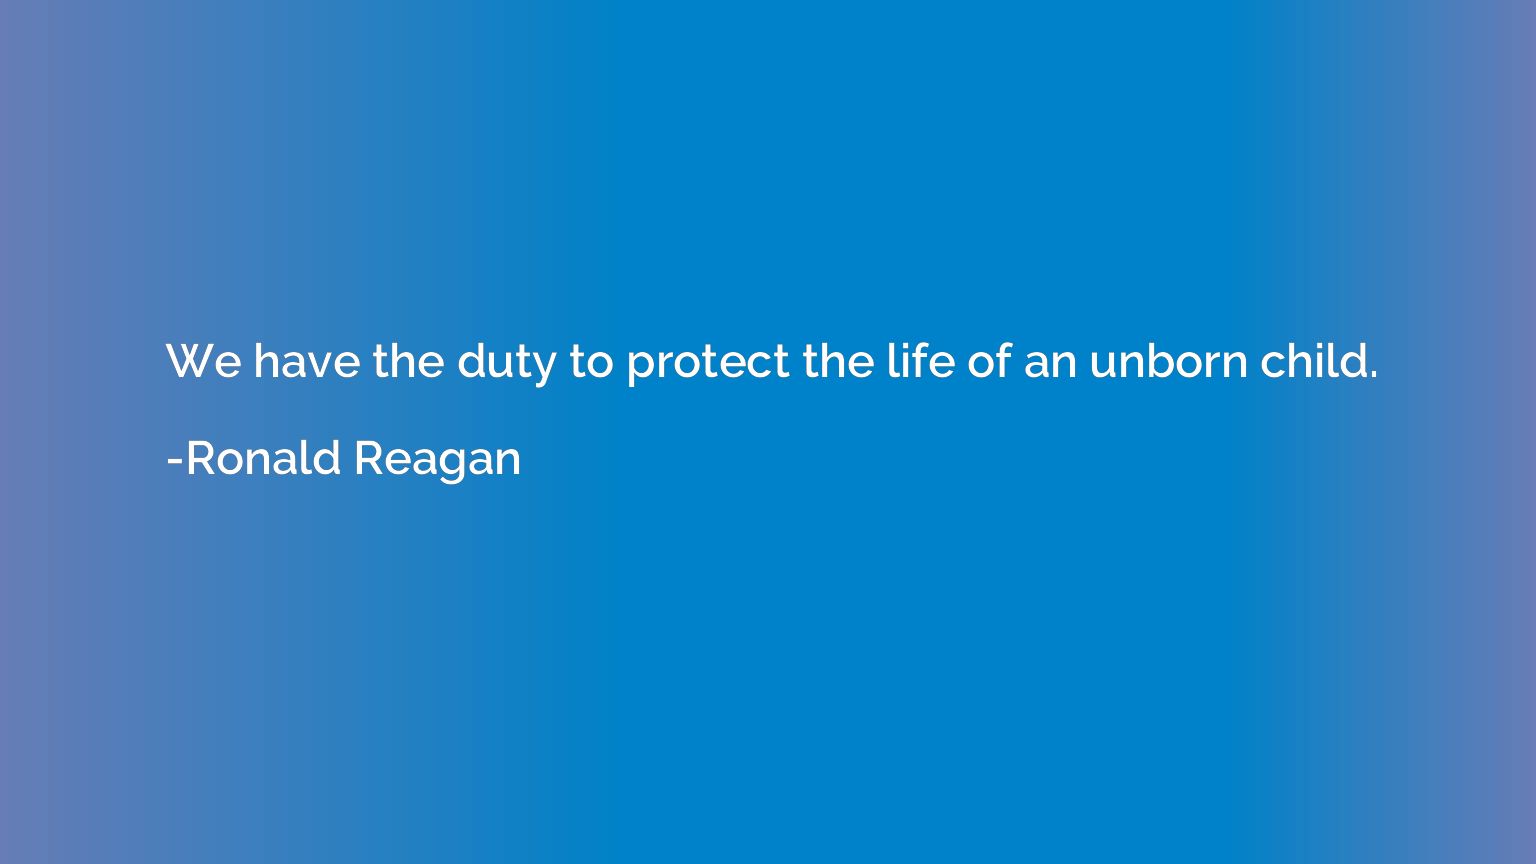 We have the duty to protect the life of an unborn child.